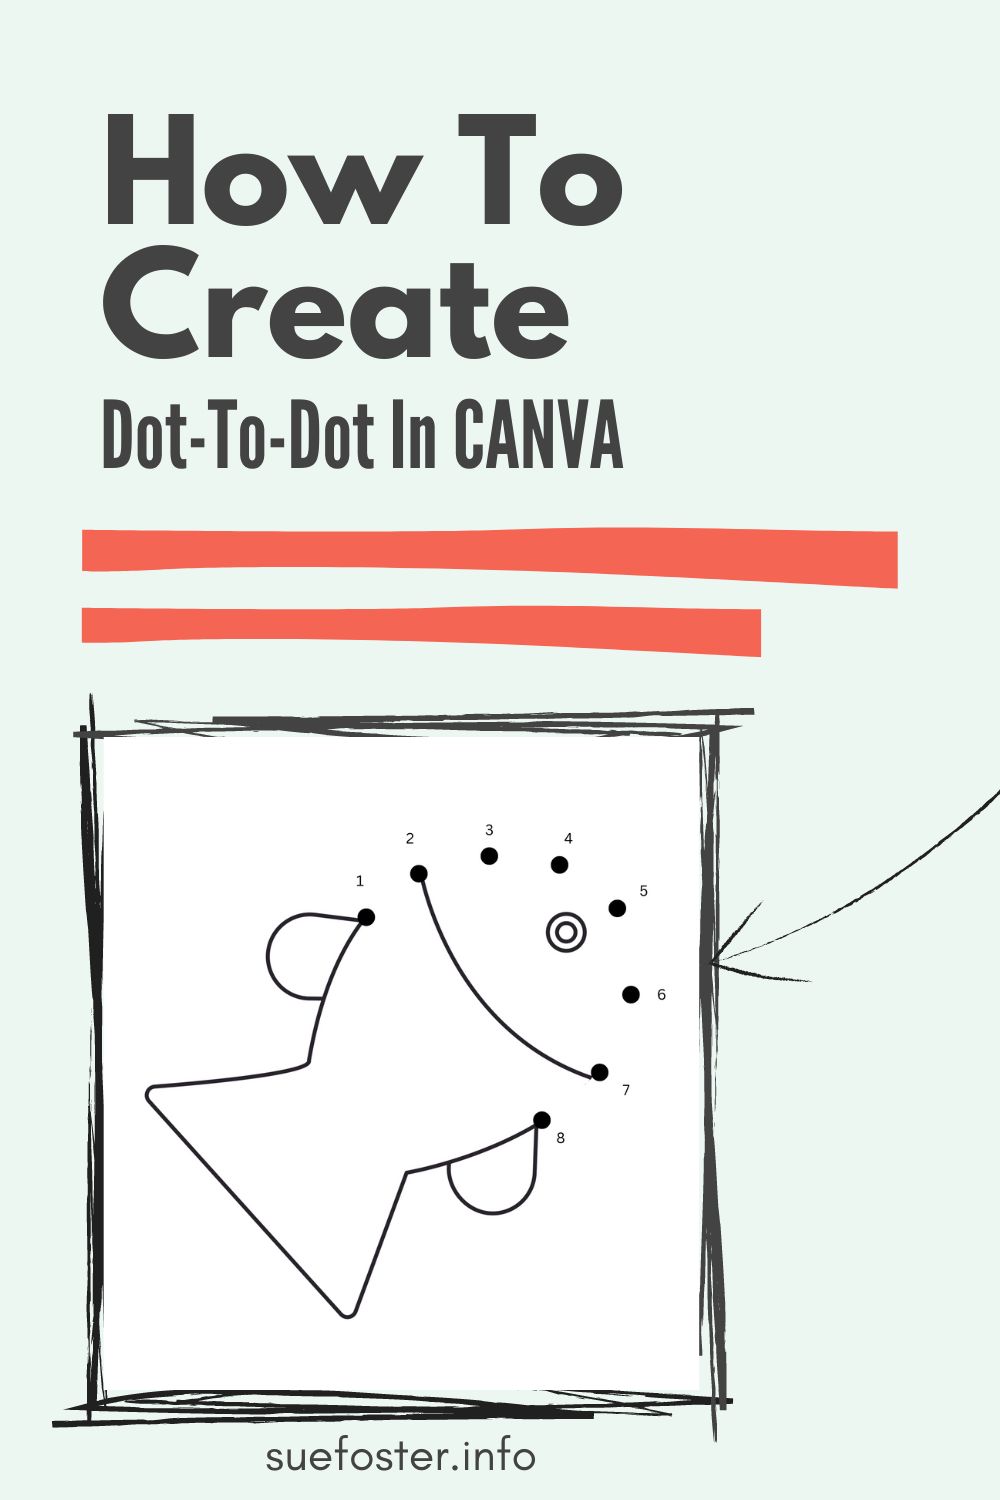 Learn to create fun dot-to-dot pages easily with Canva for KDP, Etsy or your kids. Follow these simple steps.